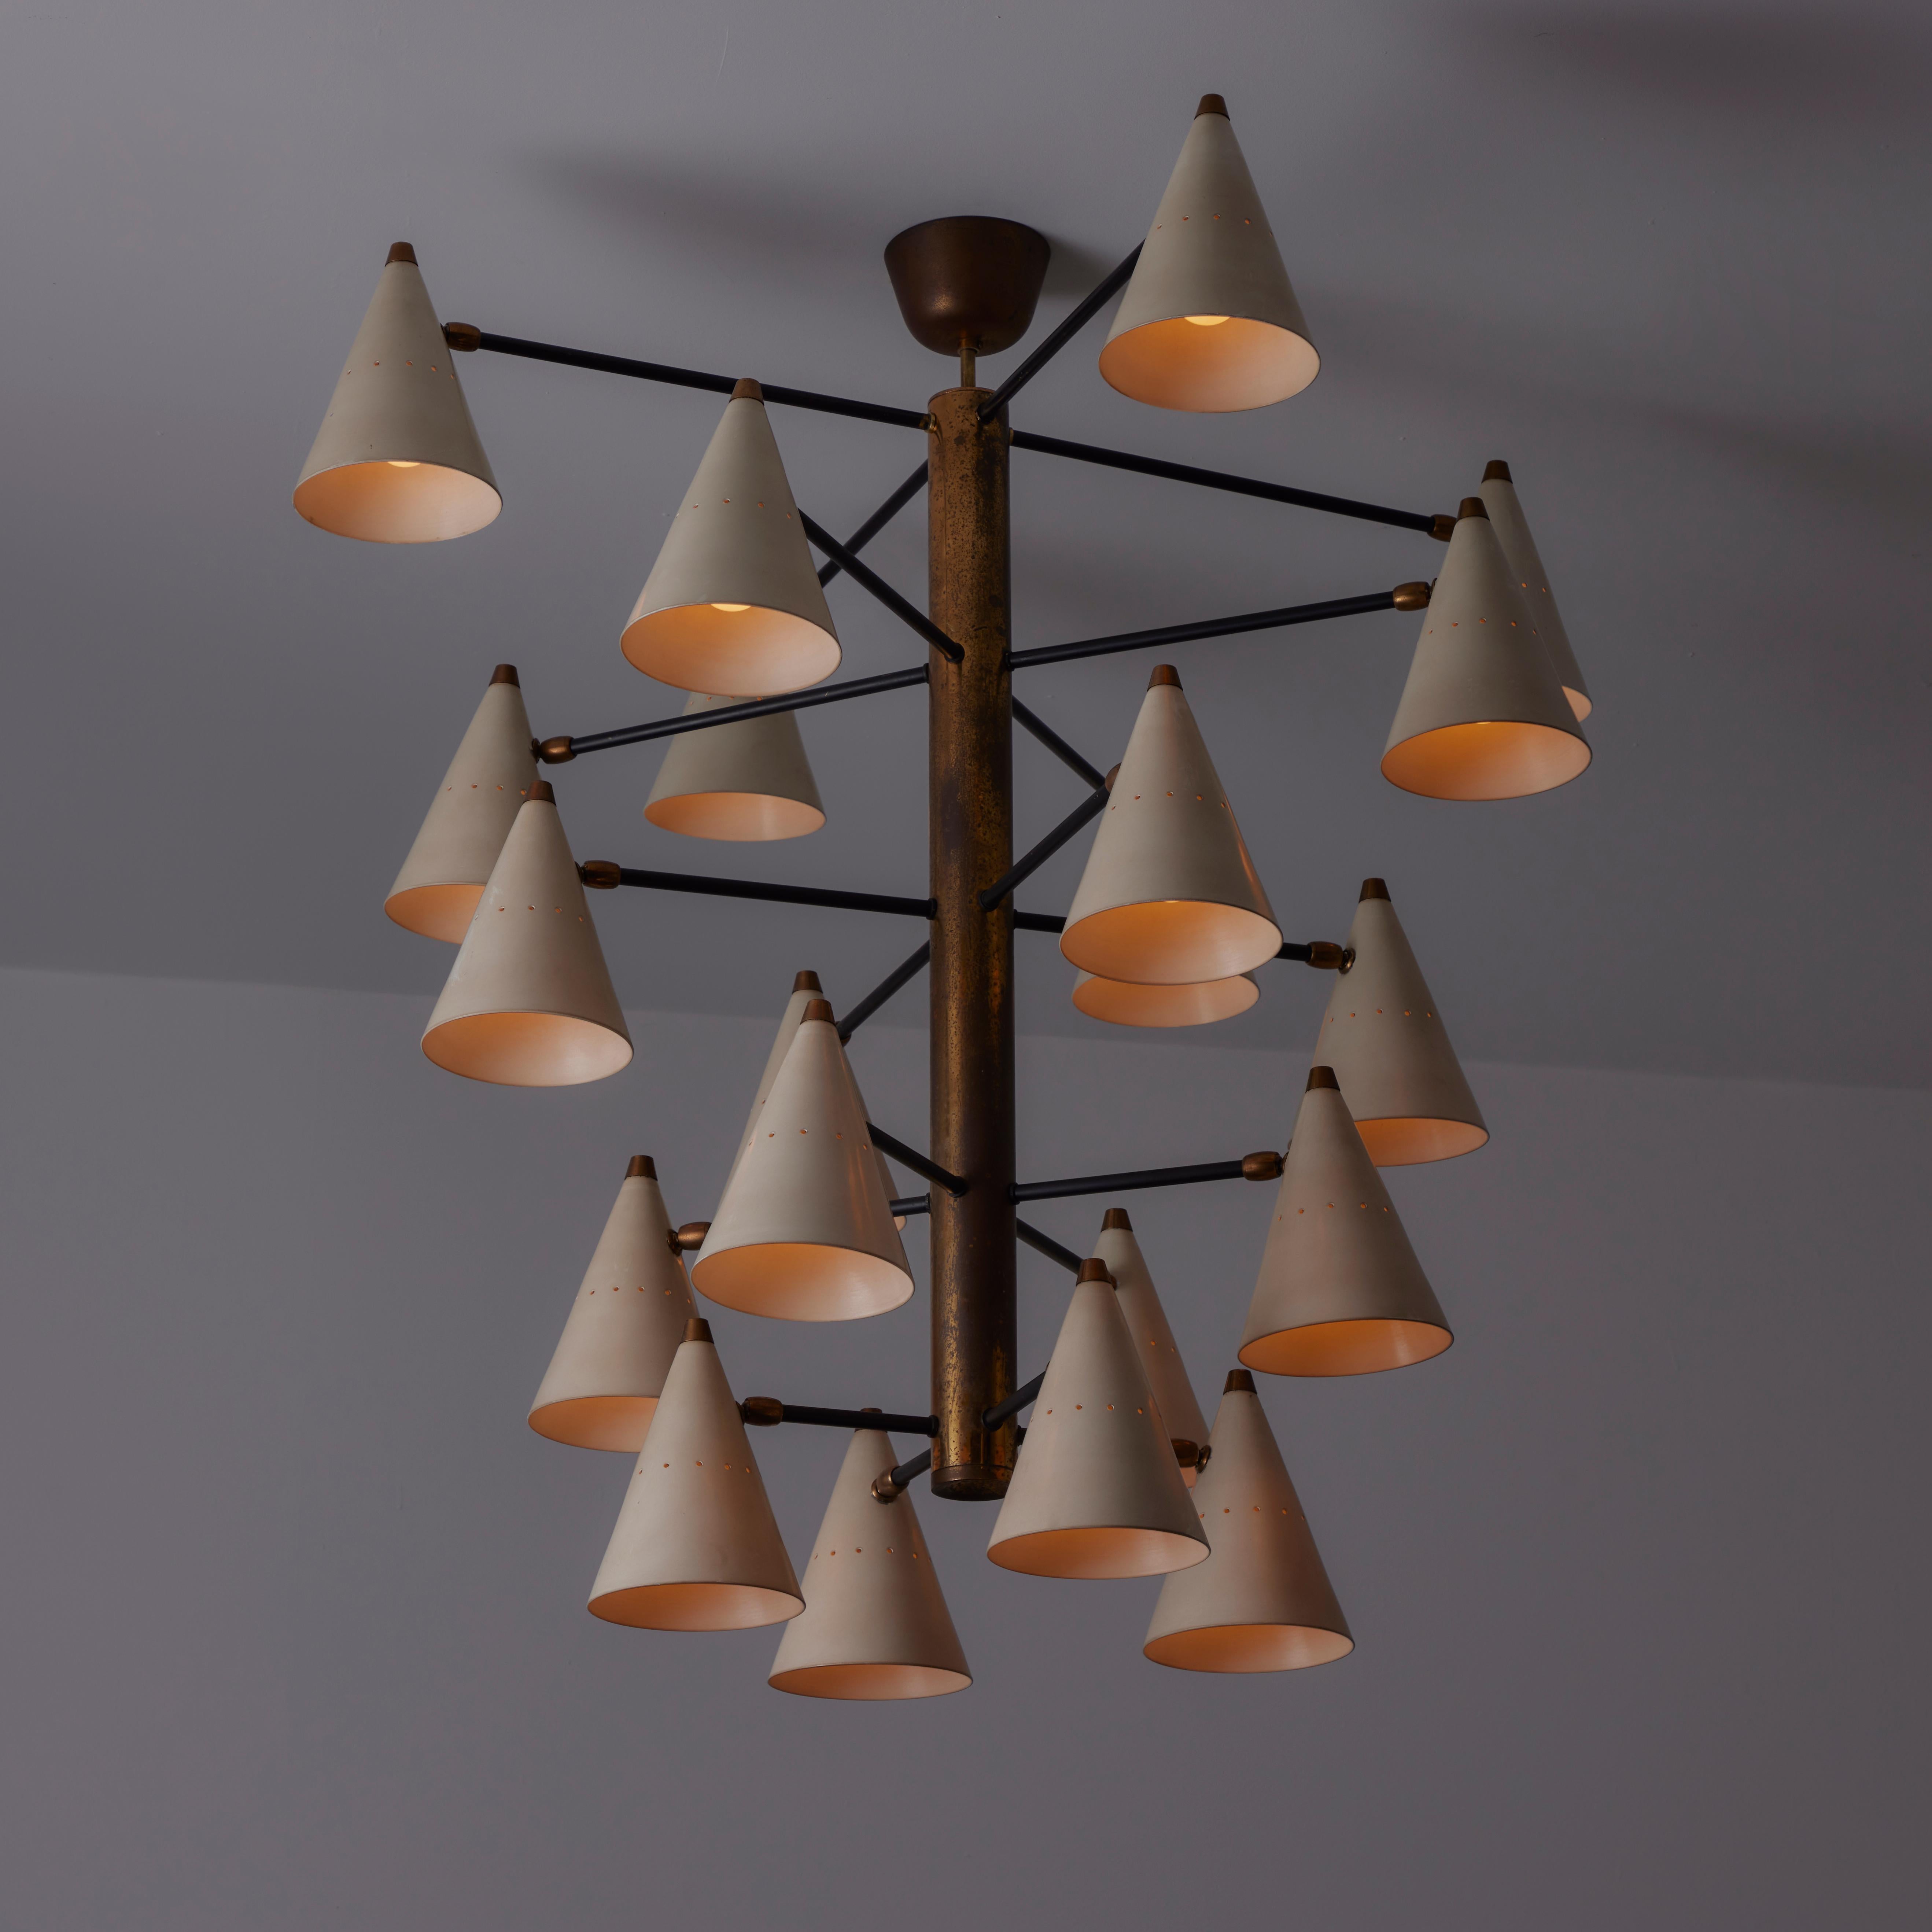 Ceiling Light by Stilnovo. Designed and manufactured in Italy, circa the 1950s. Conical enameled shades cascade down a heavy brass tube suspension. Stunningly gothic large-scale chandelier. The lamp consists of 22 shades, each housing a single E27